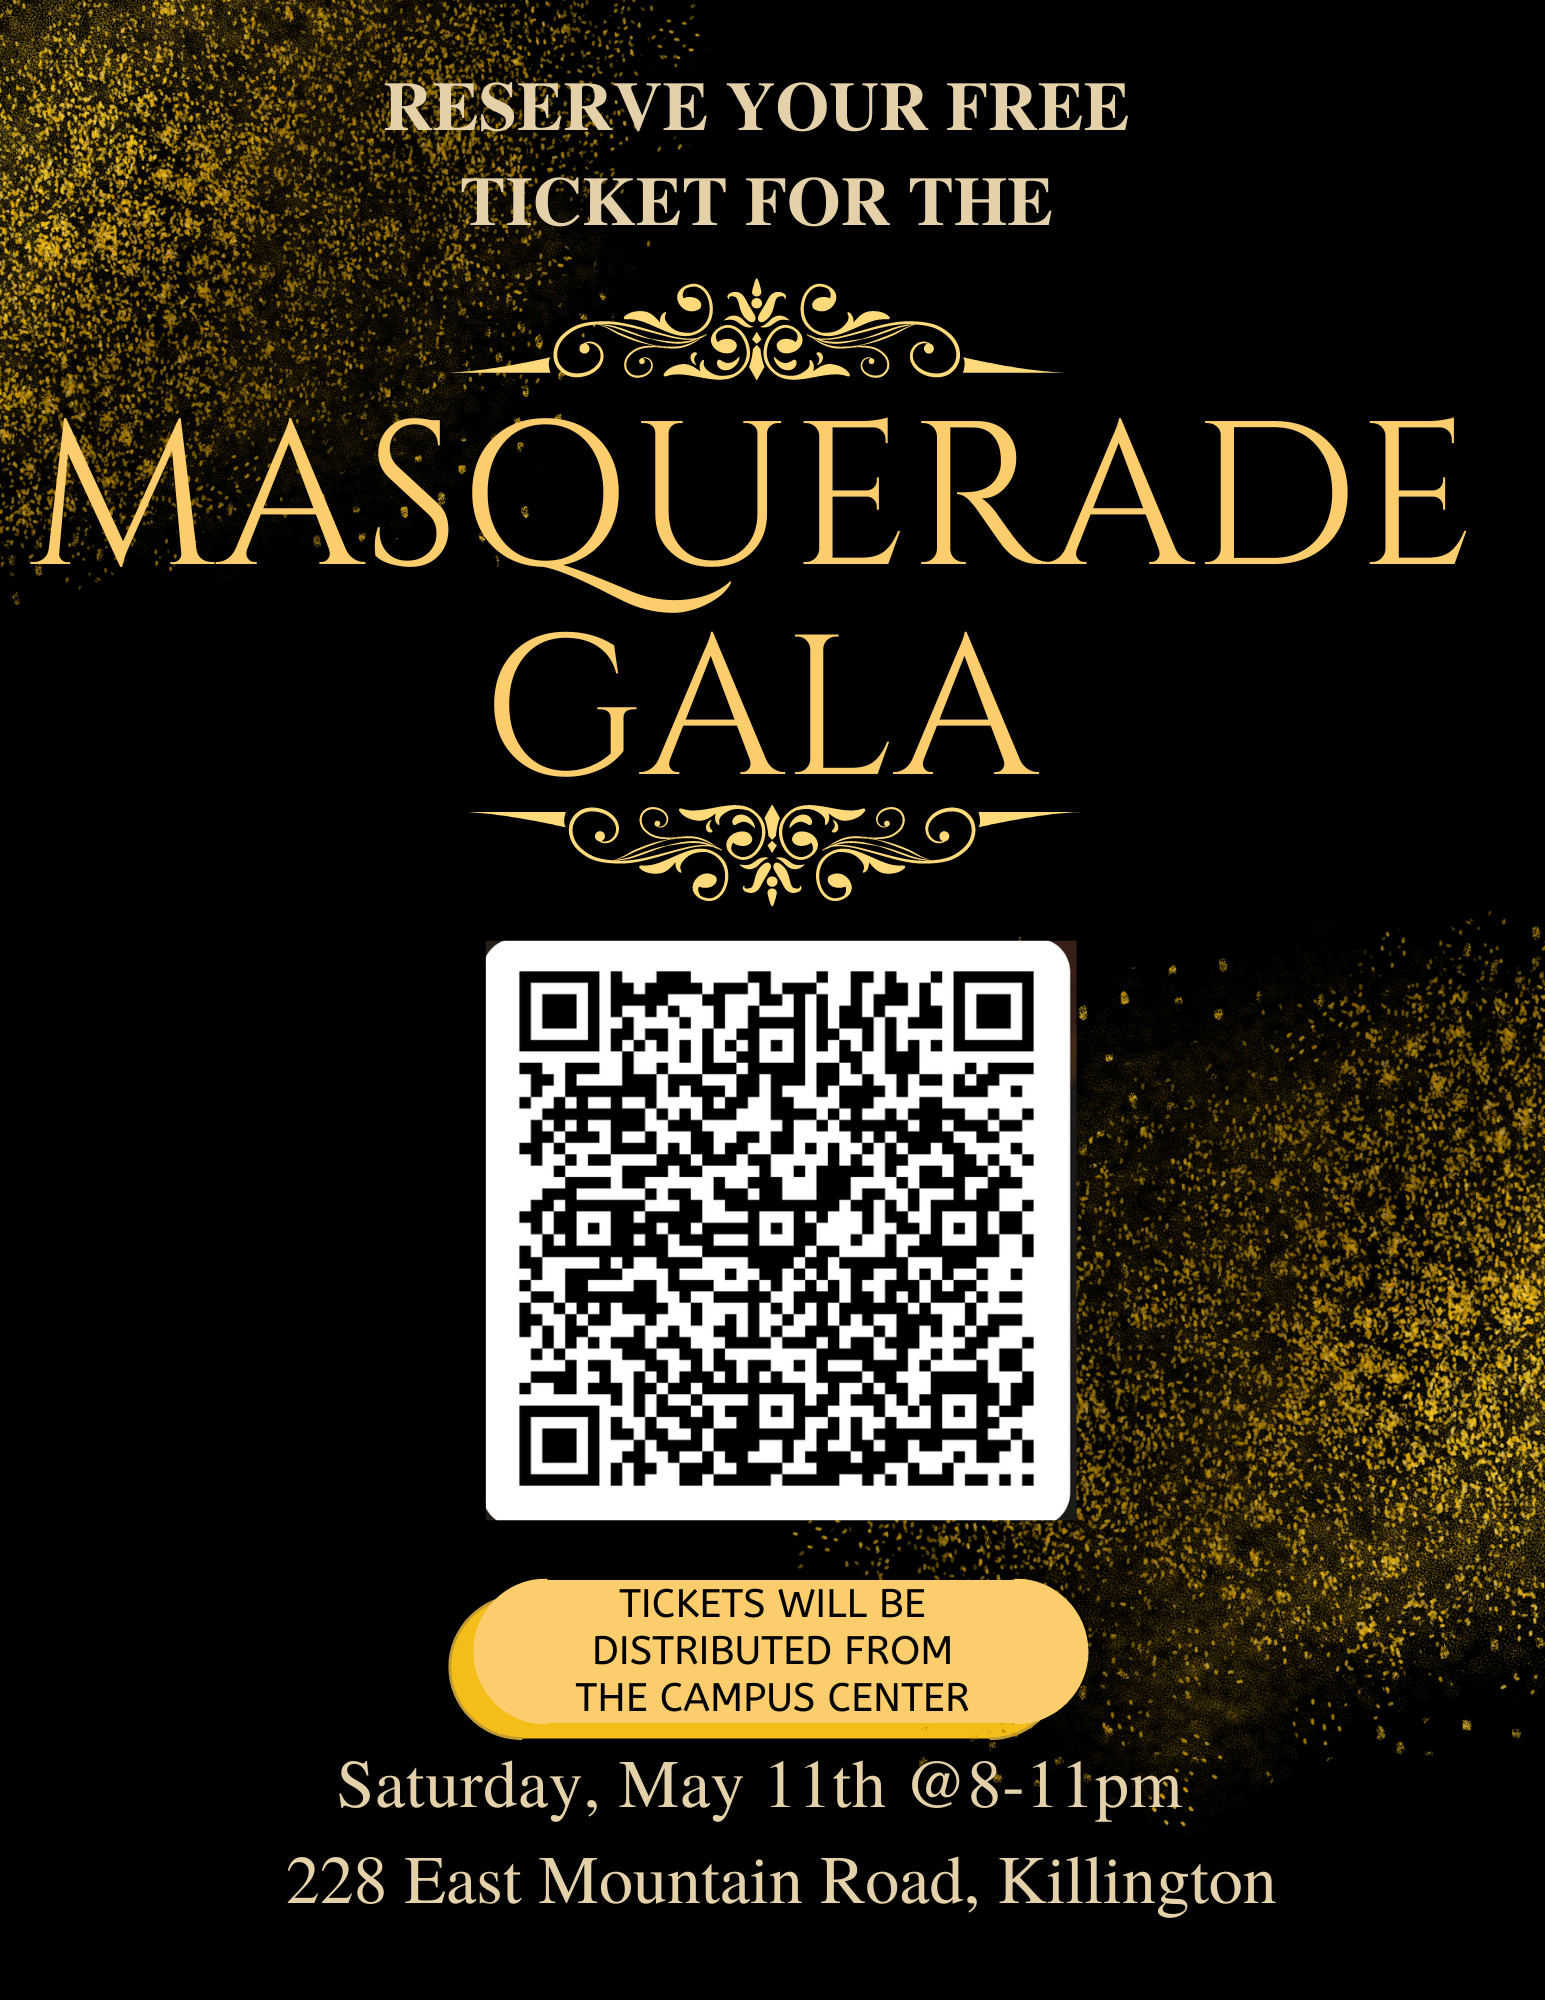 Reserve Your Free Ticket for the Masquerade Gala!!

Saturday, May 11th 

8-11 pm | 228 East Mountain Road, Killington

Tickets will be distributed from the Campus Center